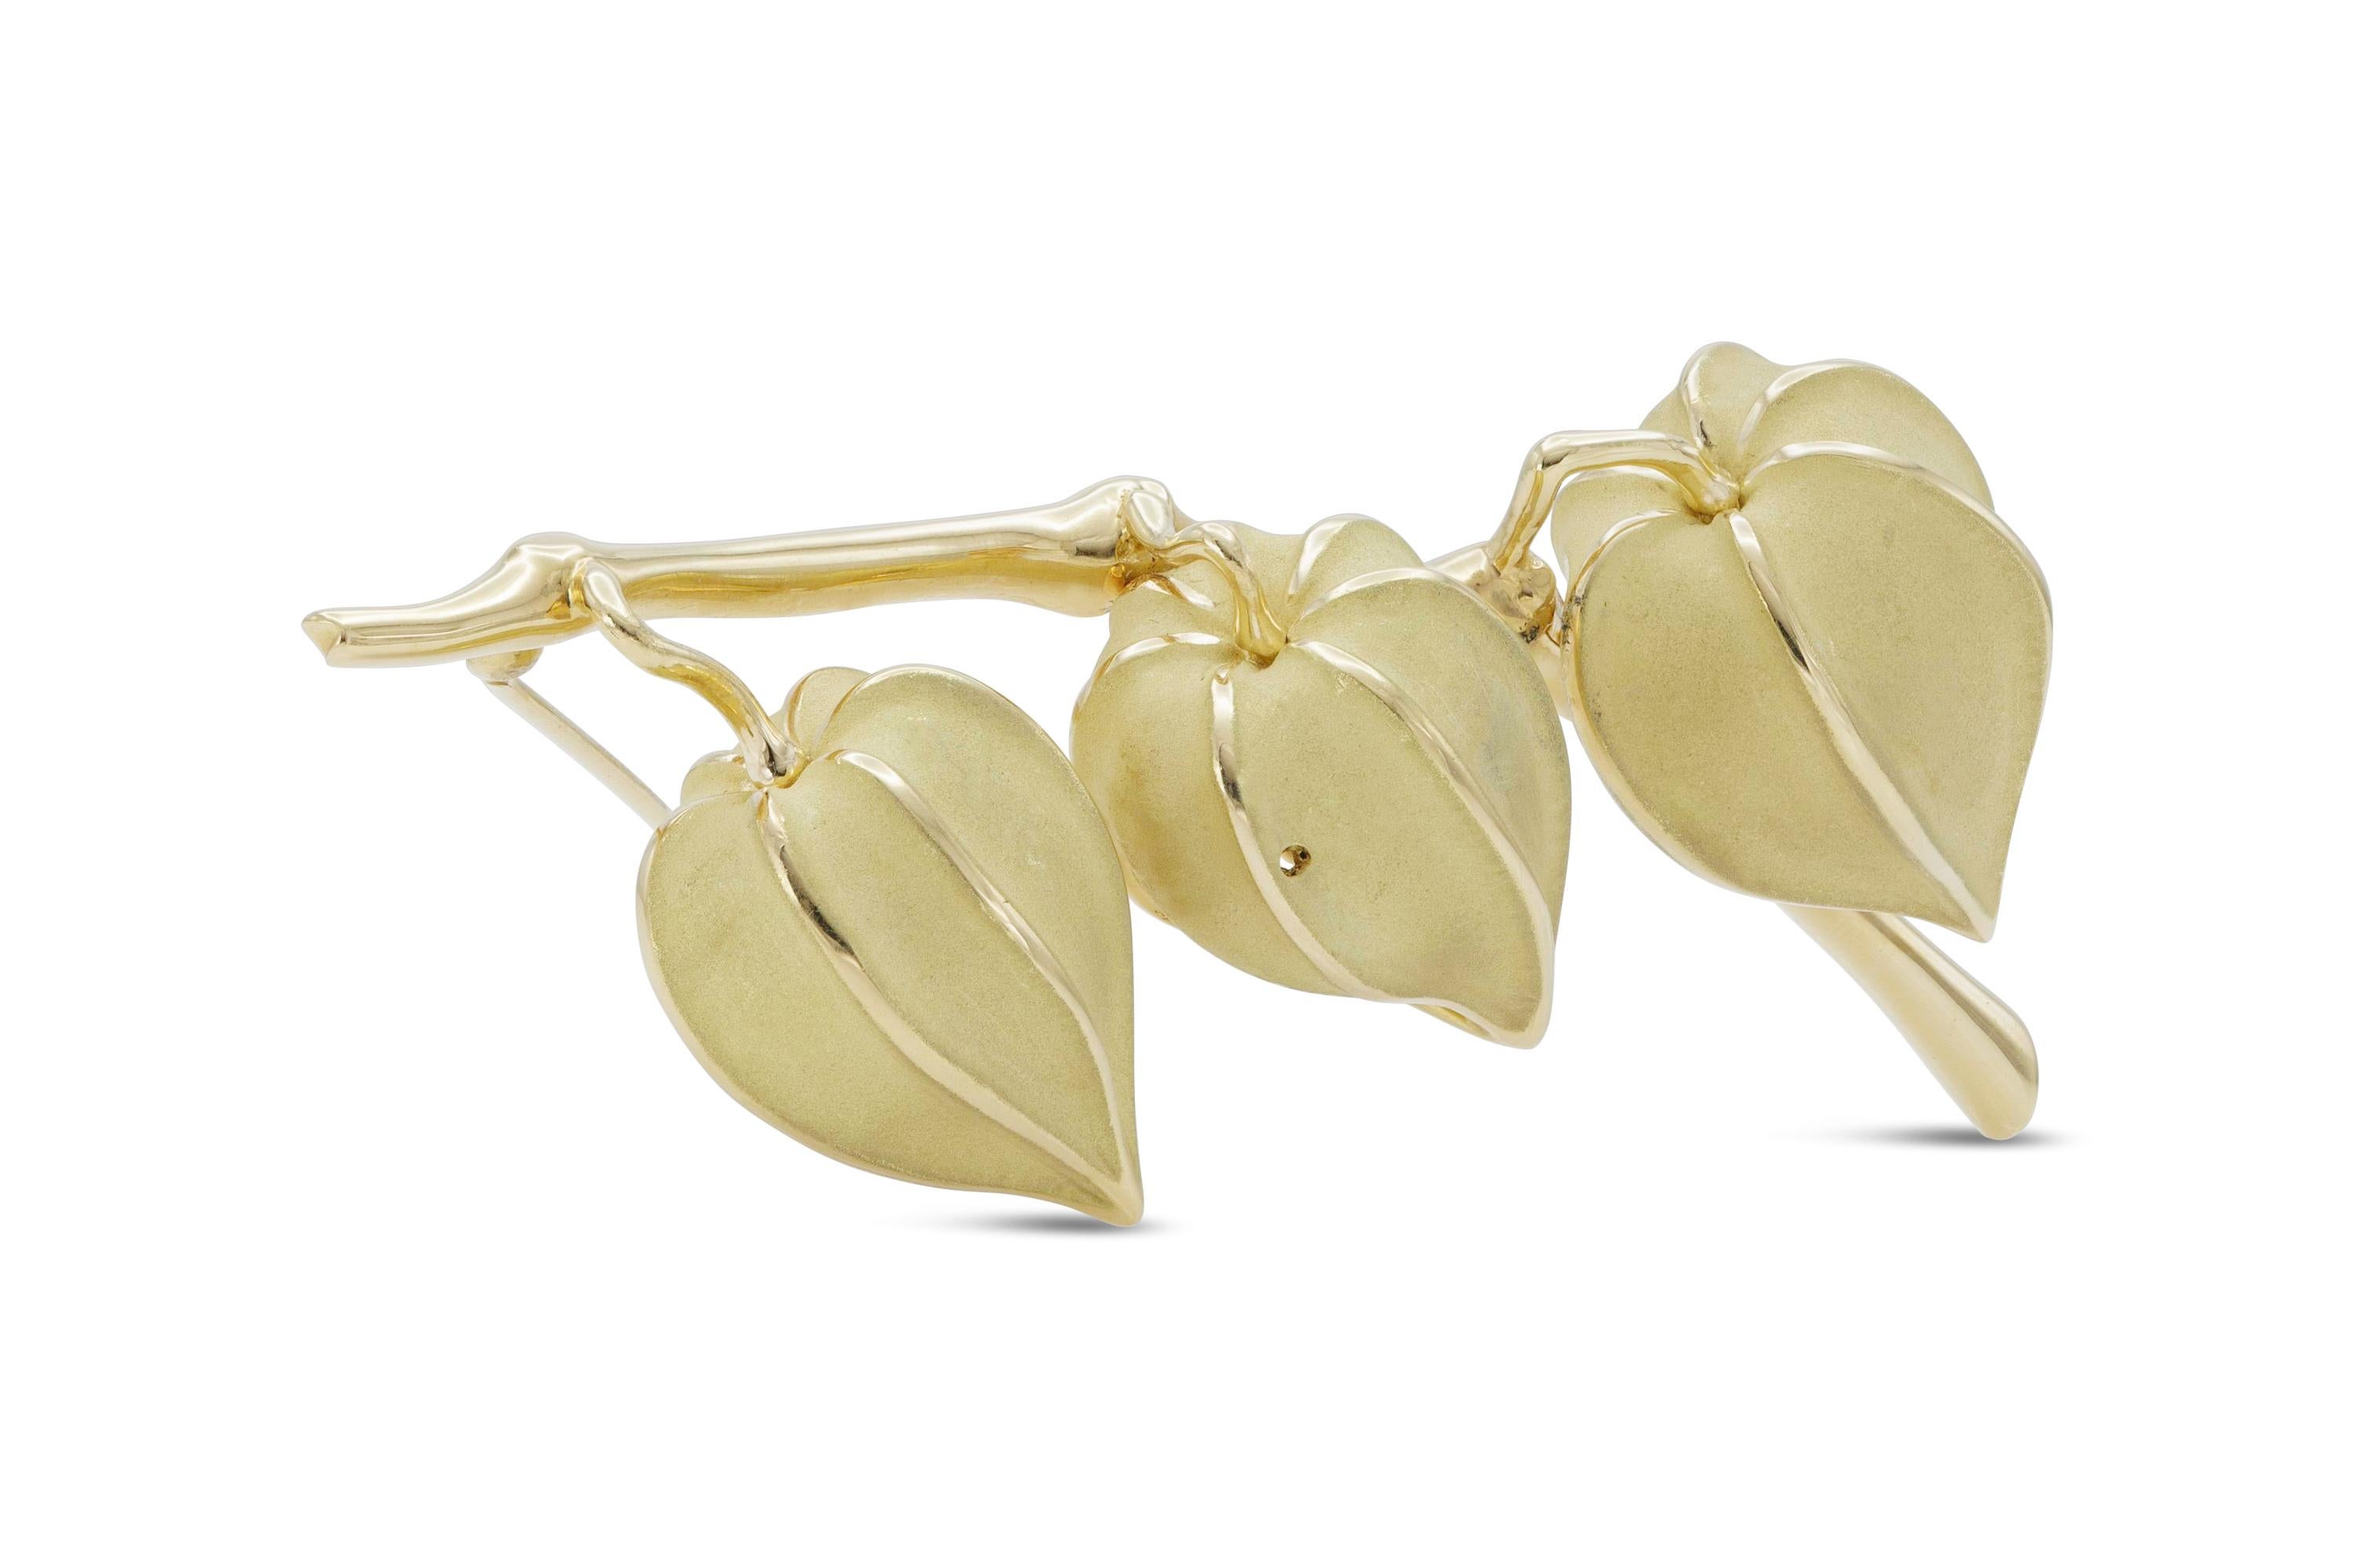 Finely crafted in 18K yellow gold and yellow enamel.
Signed by Tiffany & Co. 